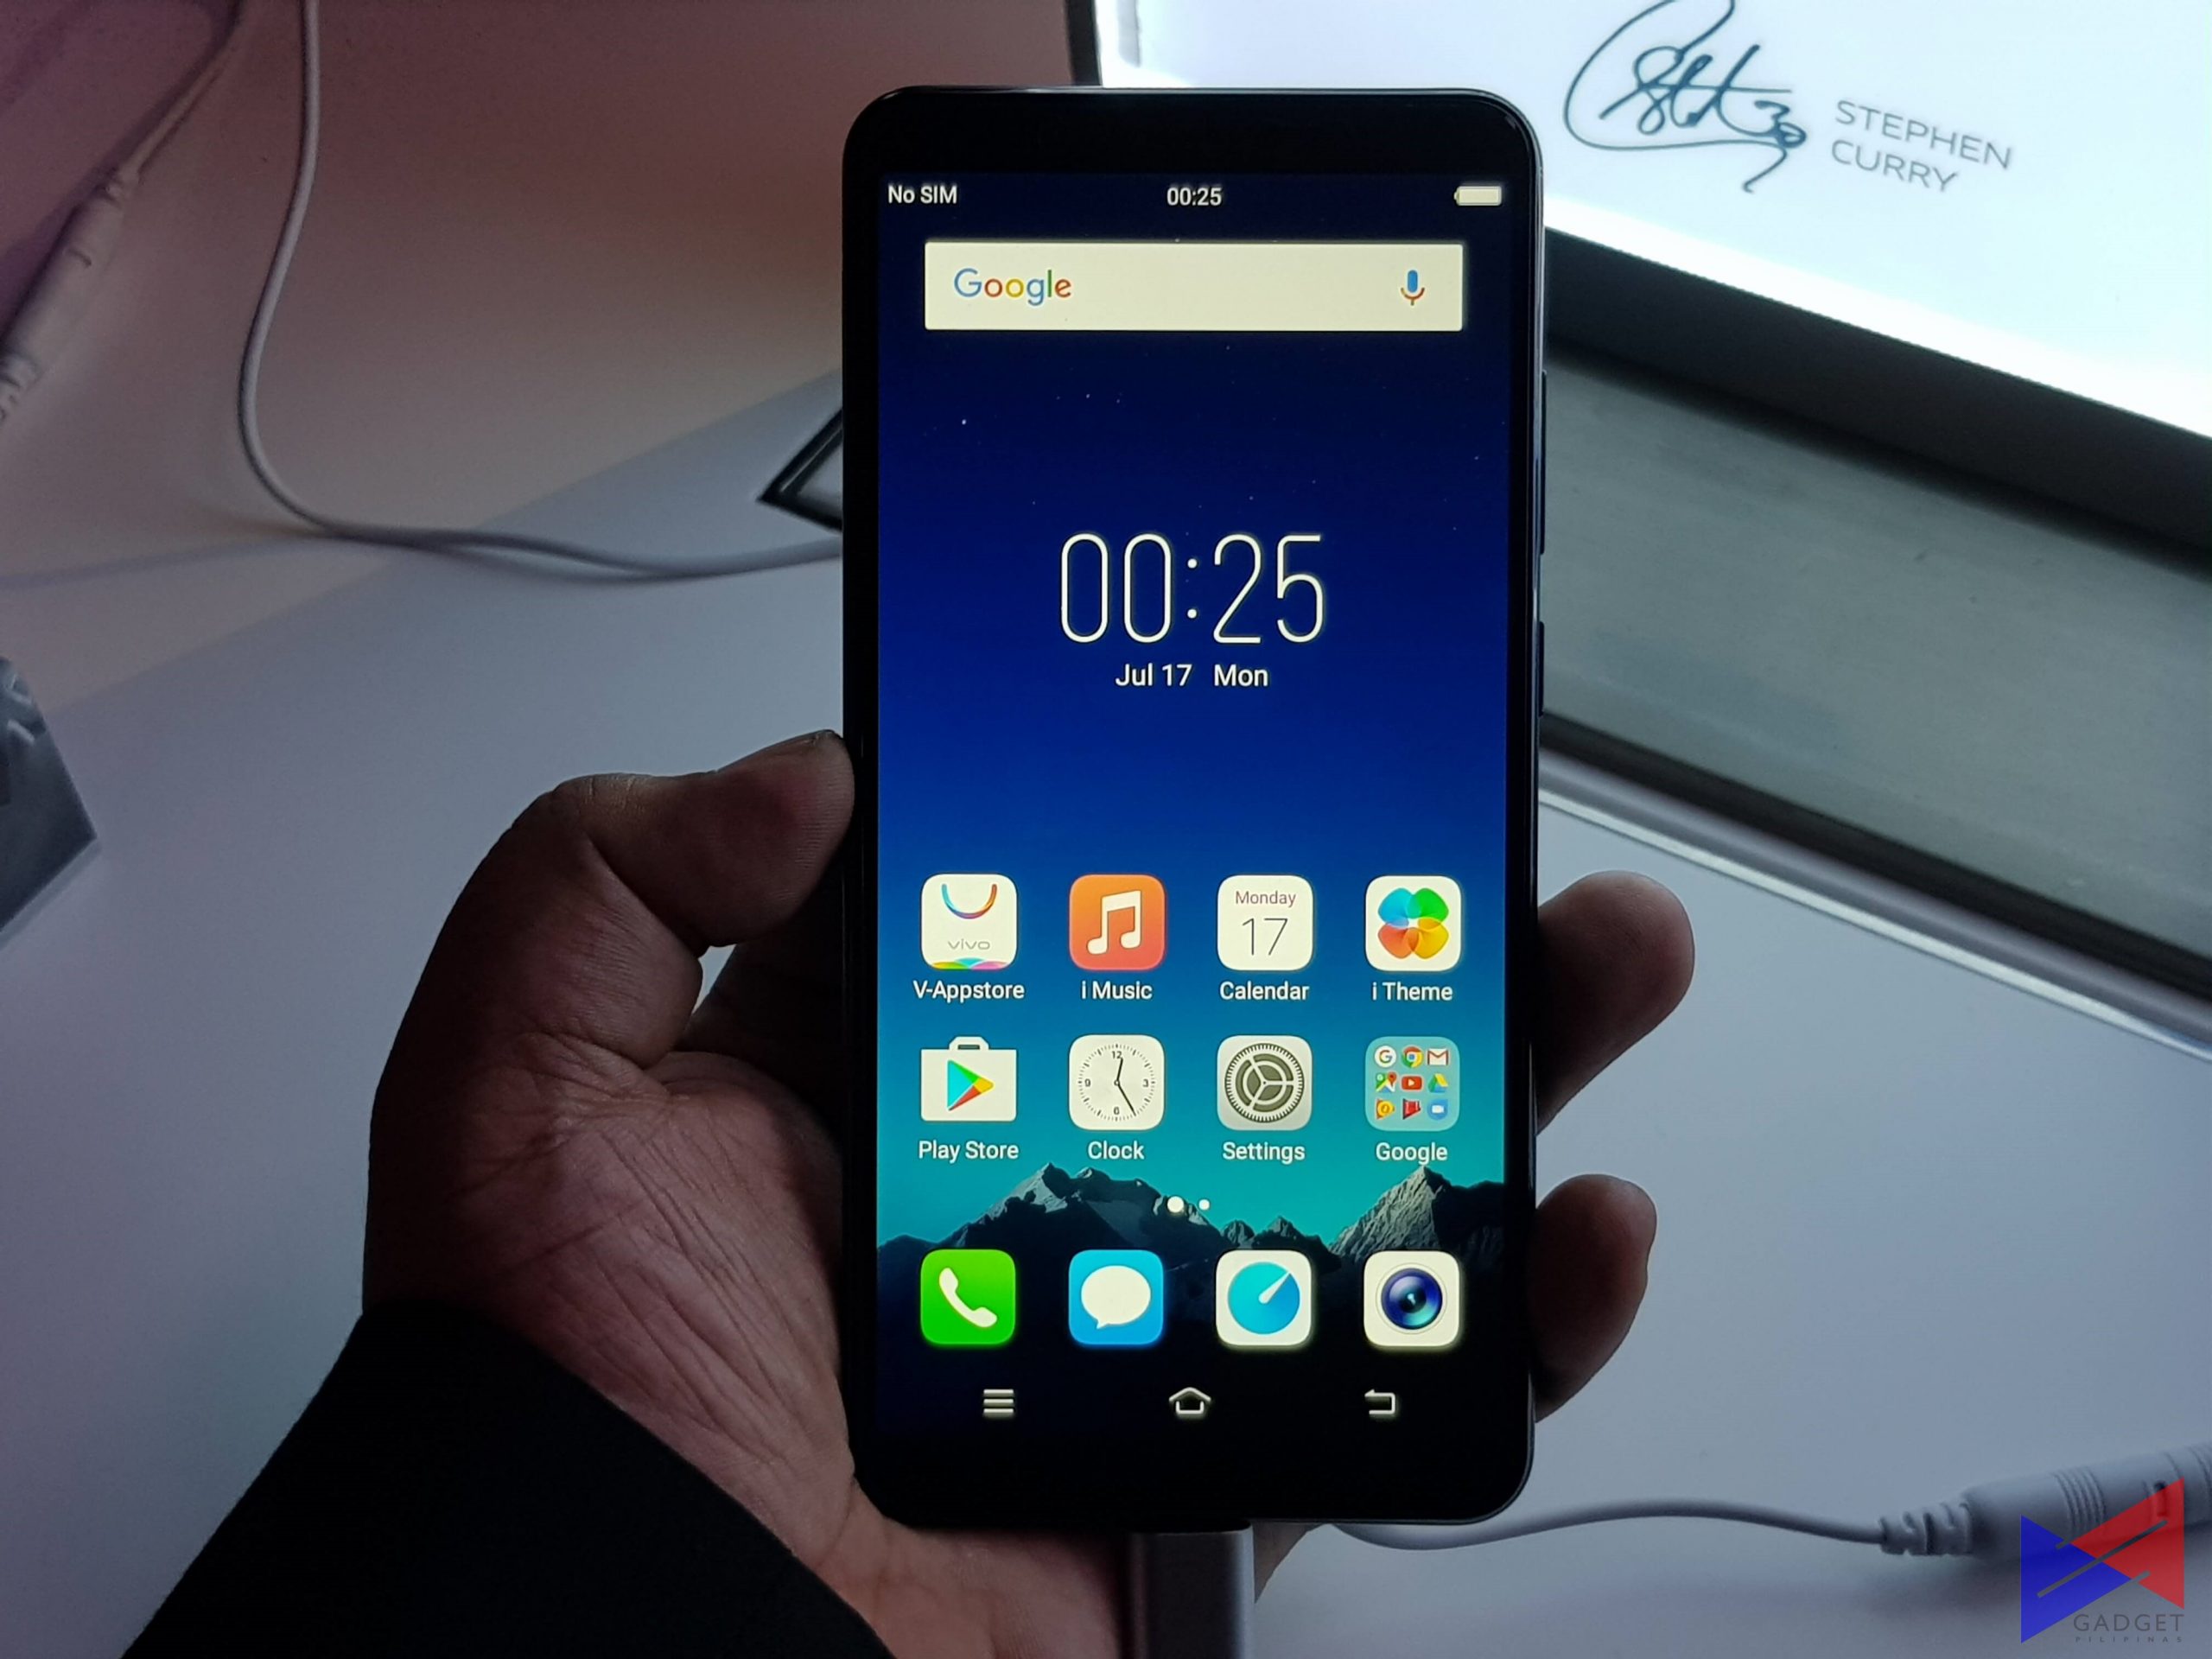 Vivo V7+ Now Available in PH: Gets Over 5,000 Pre-Orders in One Week